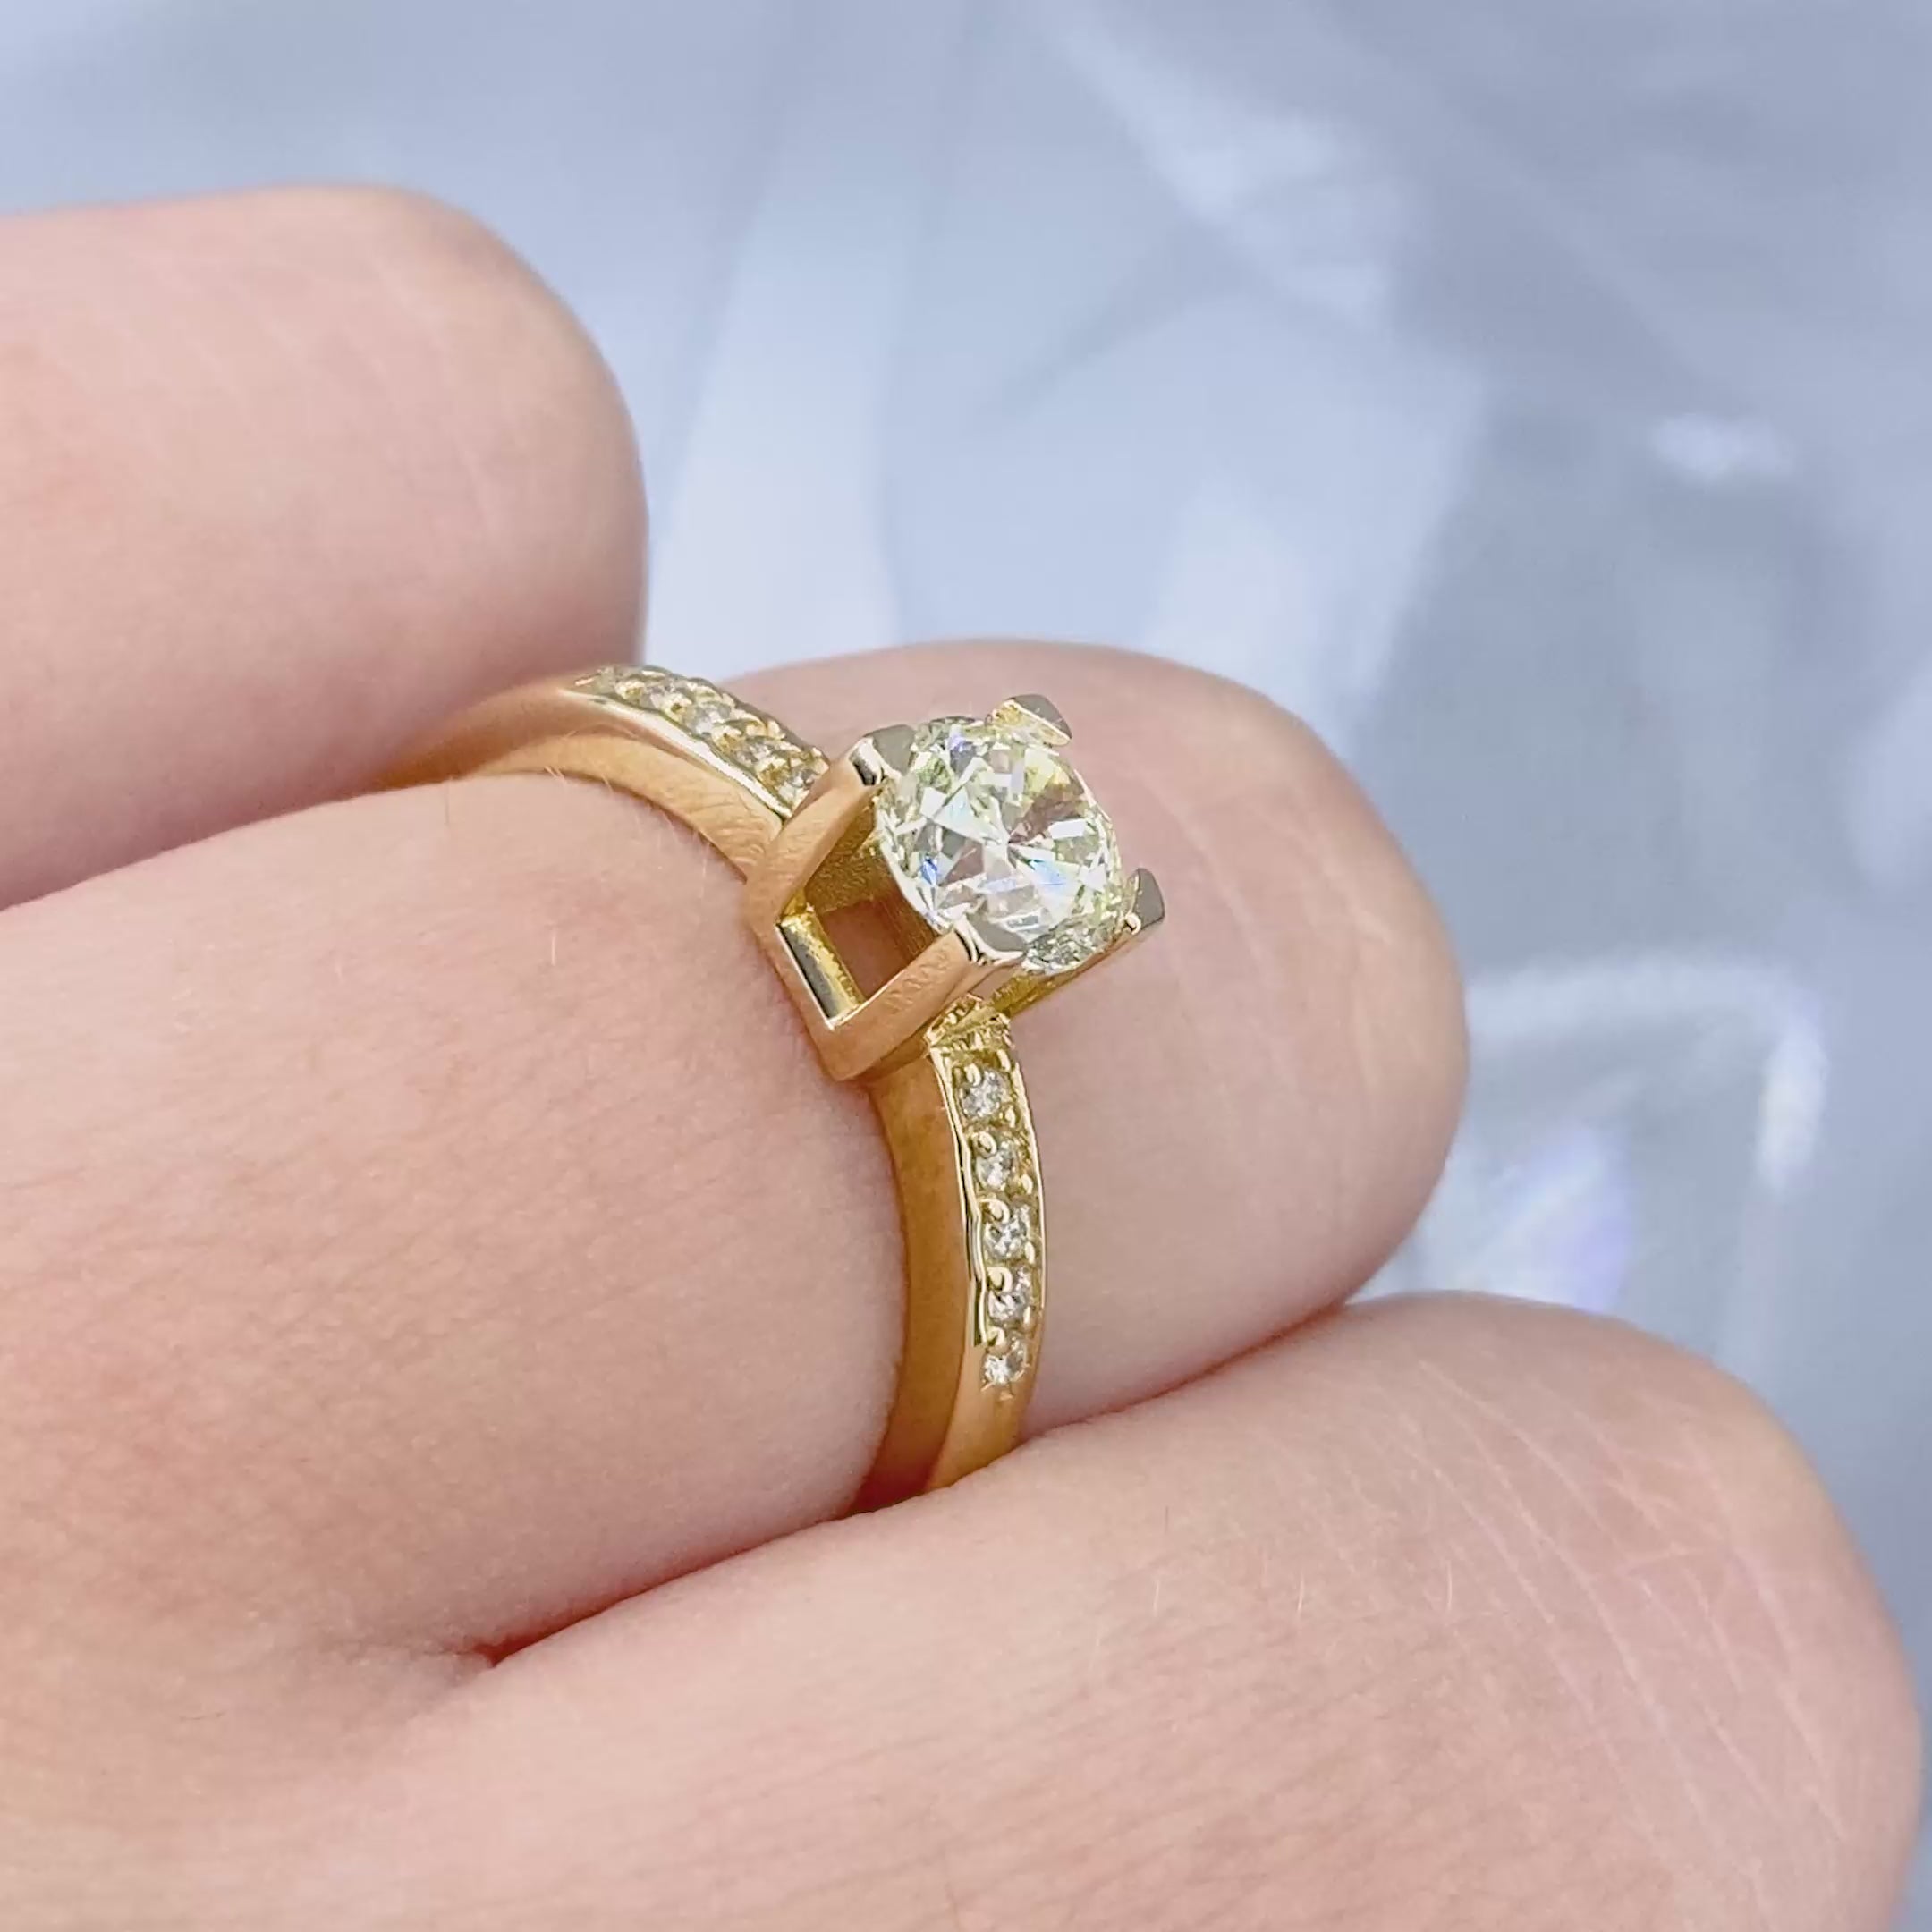 Inexpensive 0.90 CT Round Cut Diamond Engagement Ring in 14 KT Yellow Gold